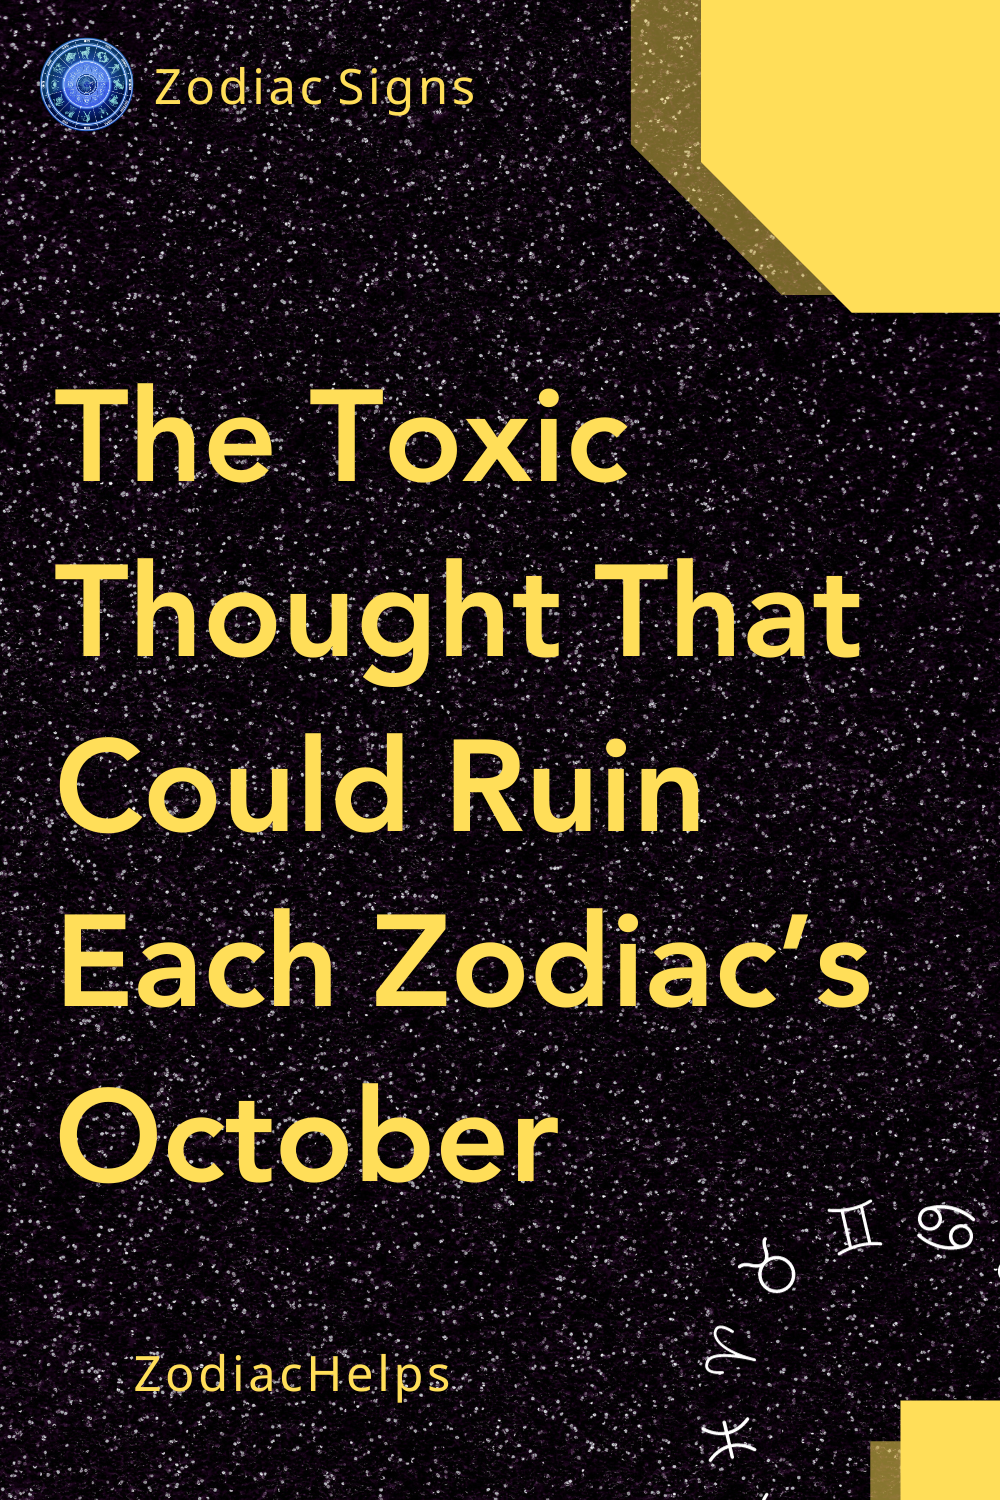 The Toxic Thought That Could Ruin Each Zodiac’s October